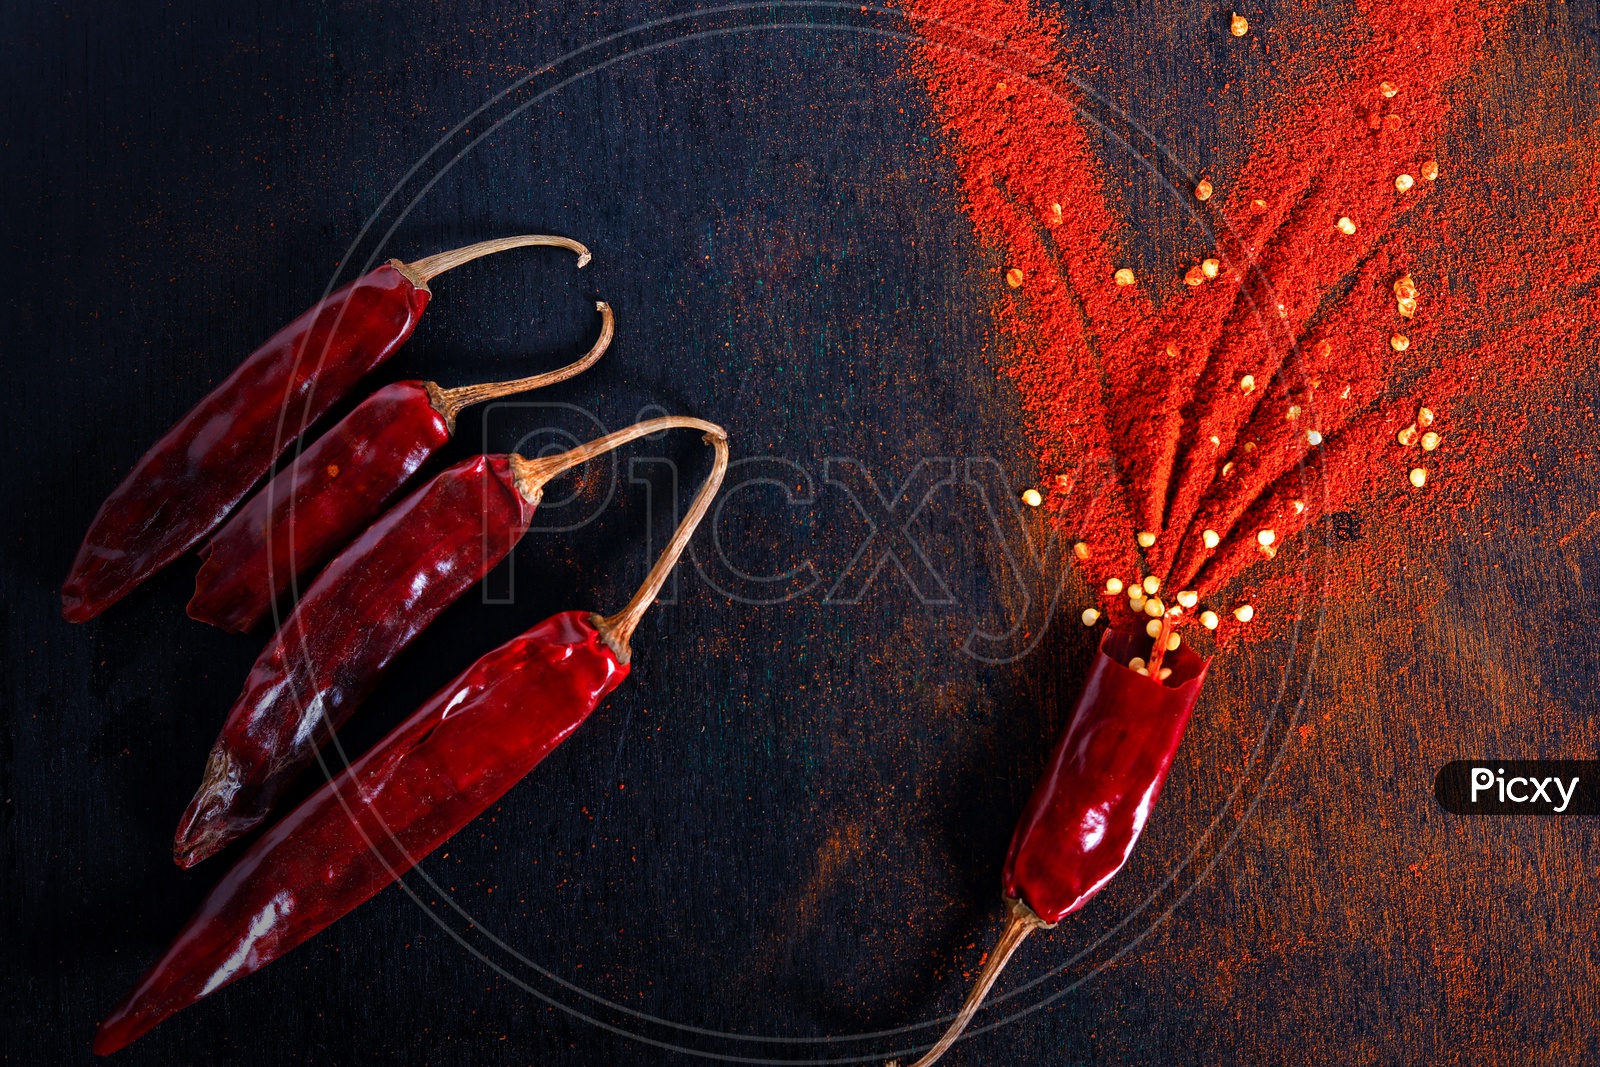 Red Chilli  Or Pepper Powder  With Chilli  Flakes On an Isolated Black Background